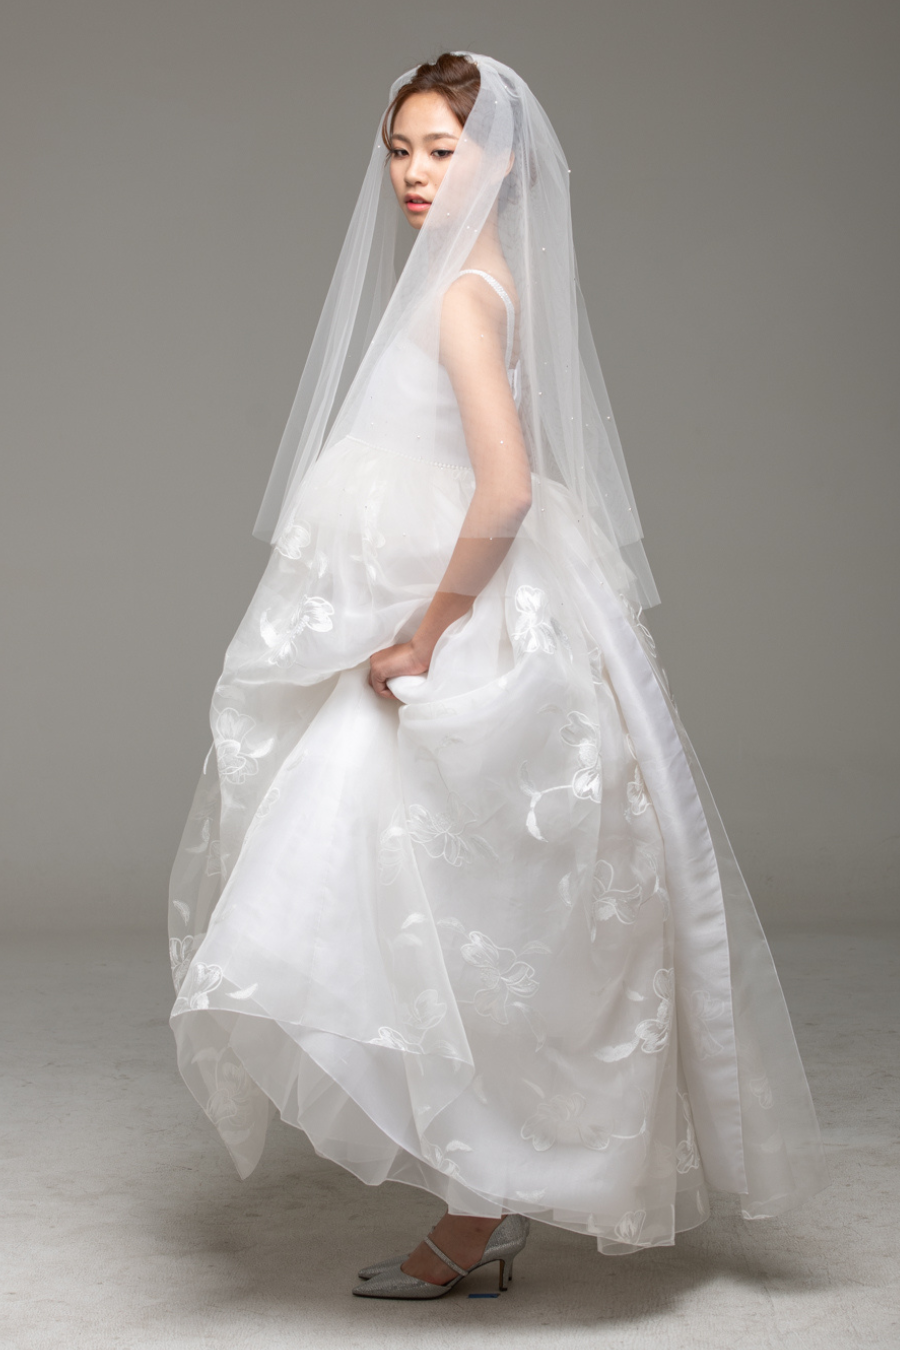 Her Wedding Dress (veil not included)